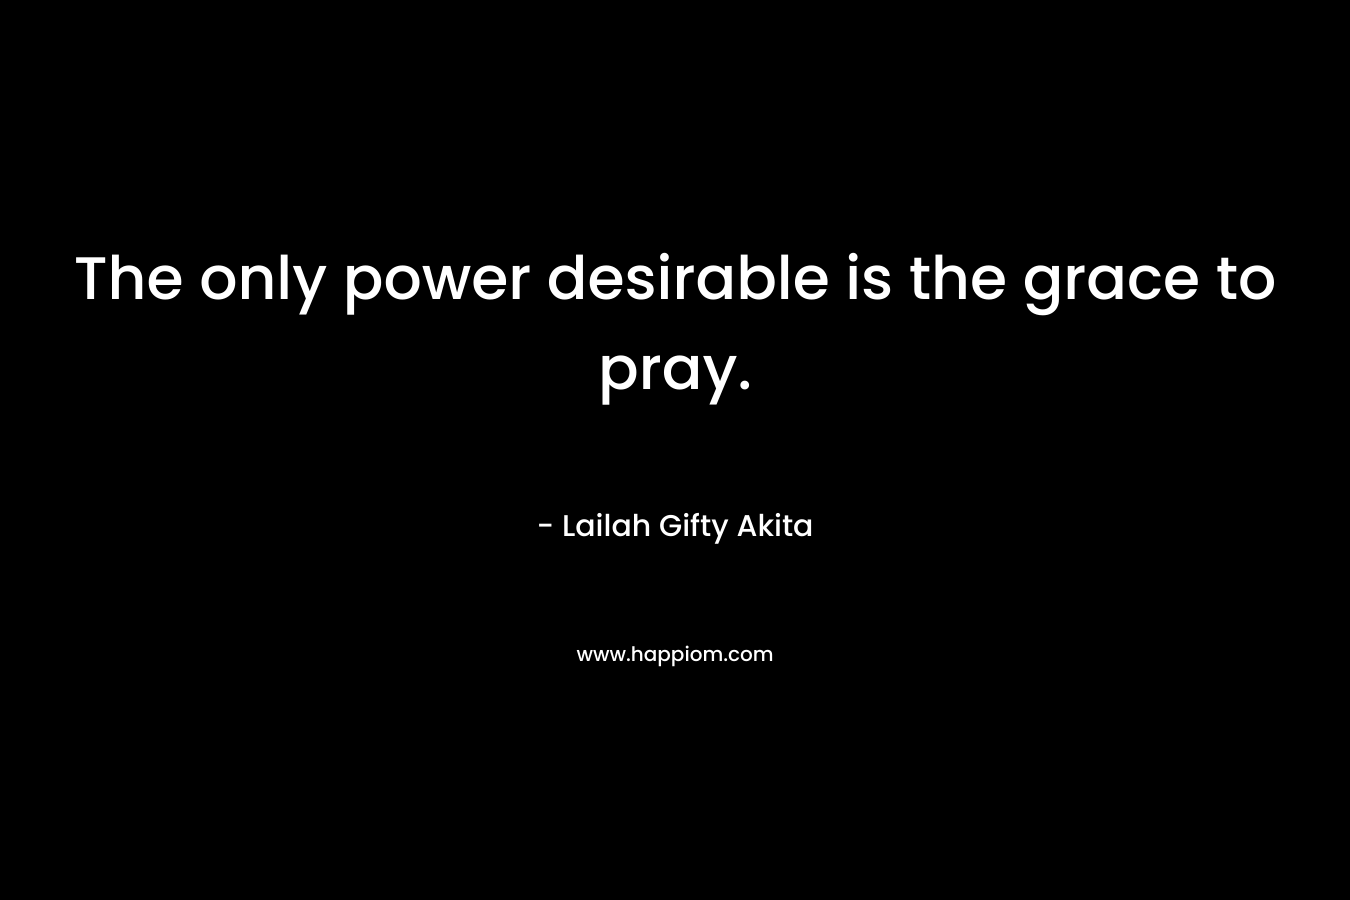 The only power desirable is the grace to pray.